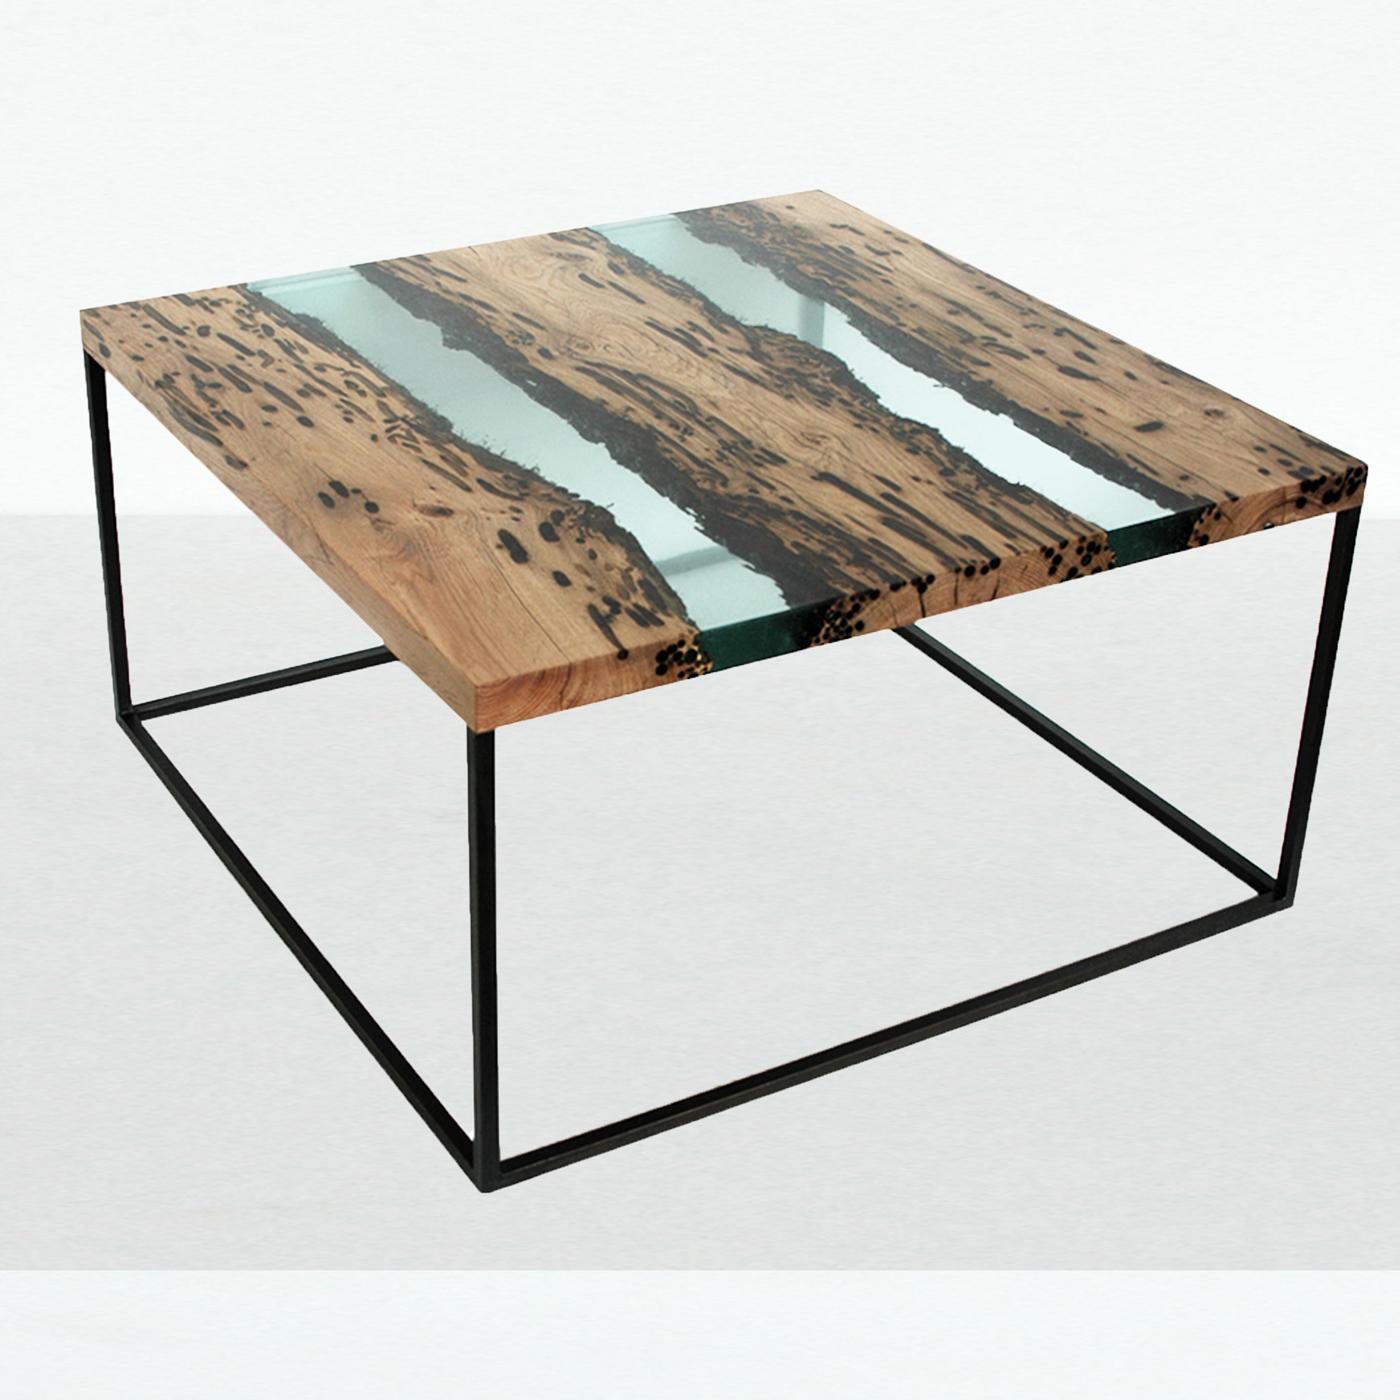 This elegant coffee table has a fine steel structure on which the top rests, creating a floating space where wood and water coexist. The reclaimed vintage oak wood of the many poles of the Venetian laguna is preserved in a special transparent resin